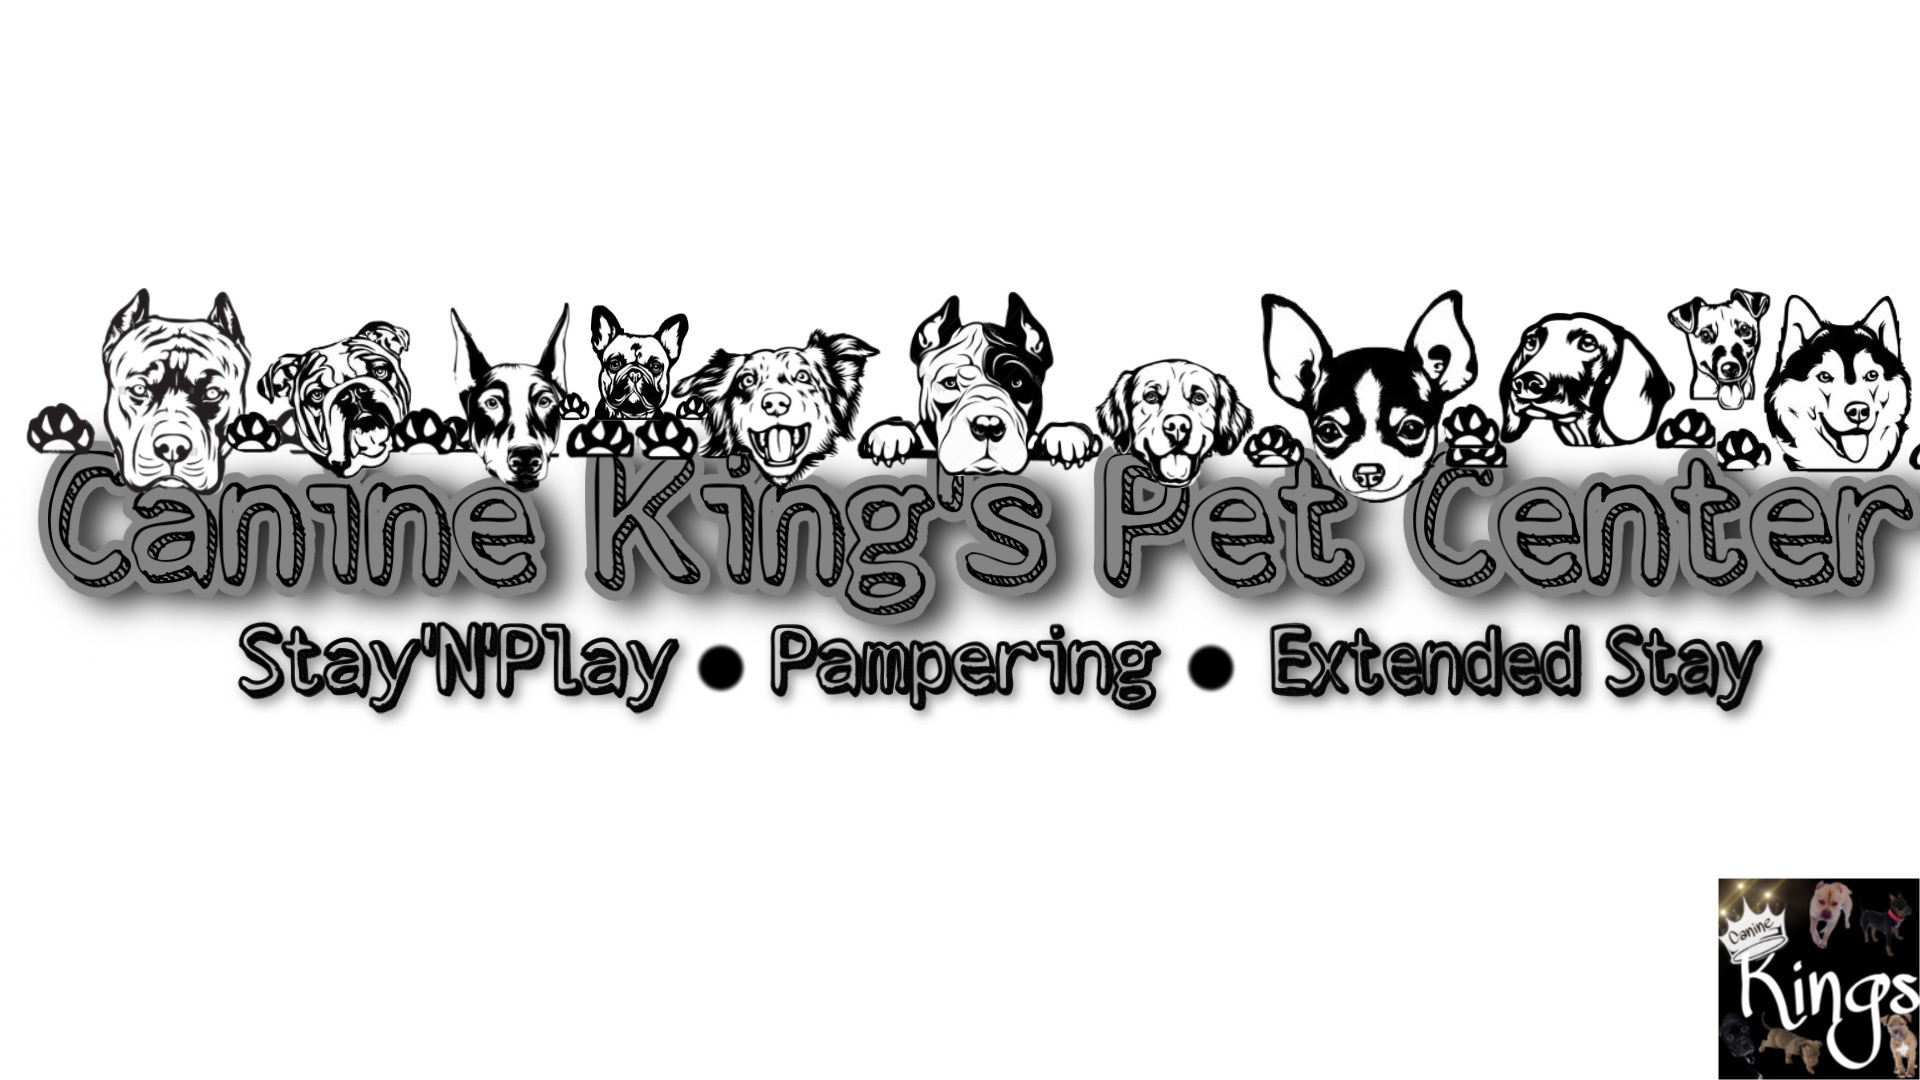 Canine Kings Pet Center